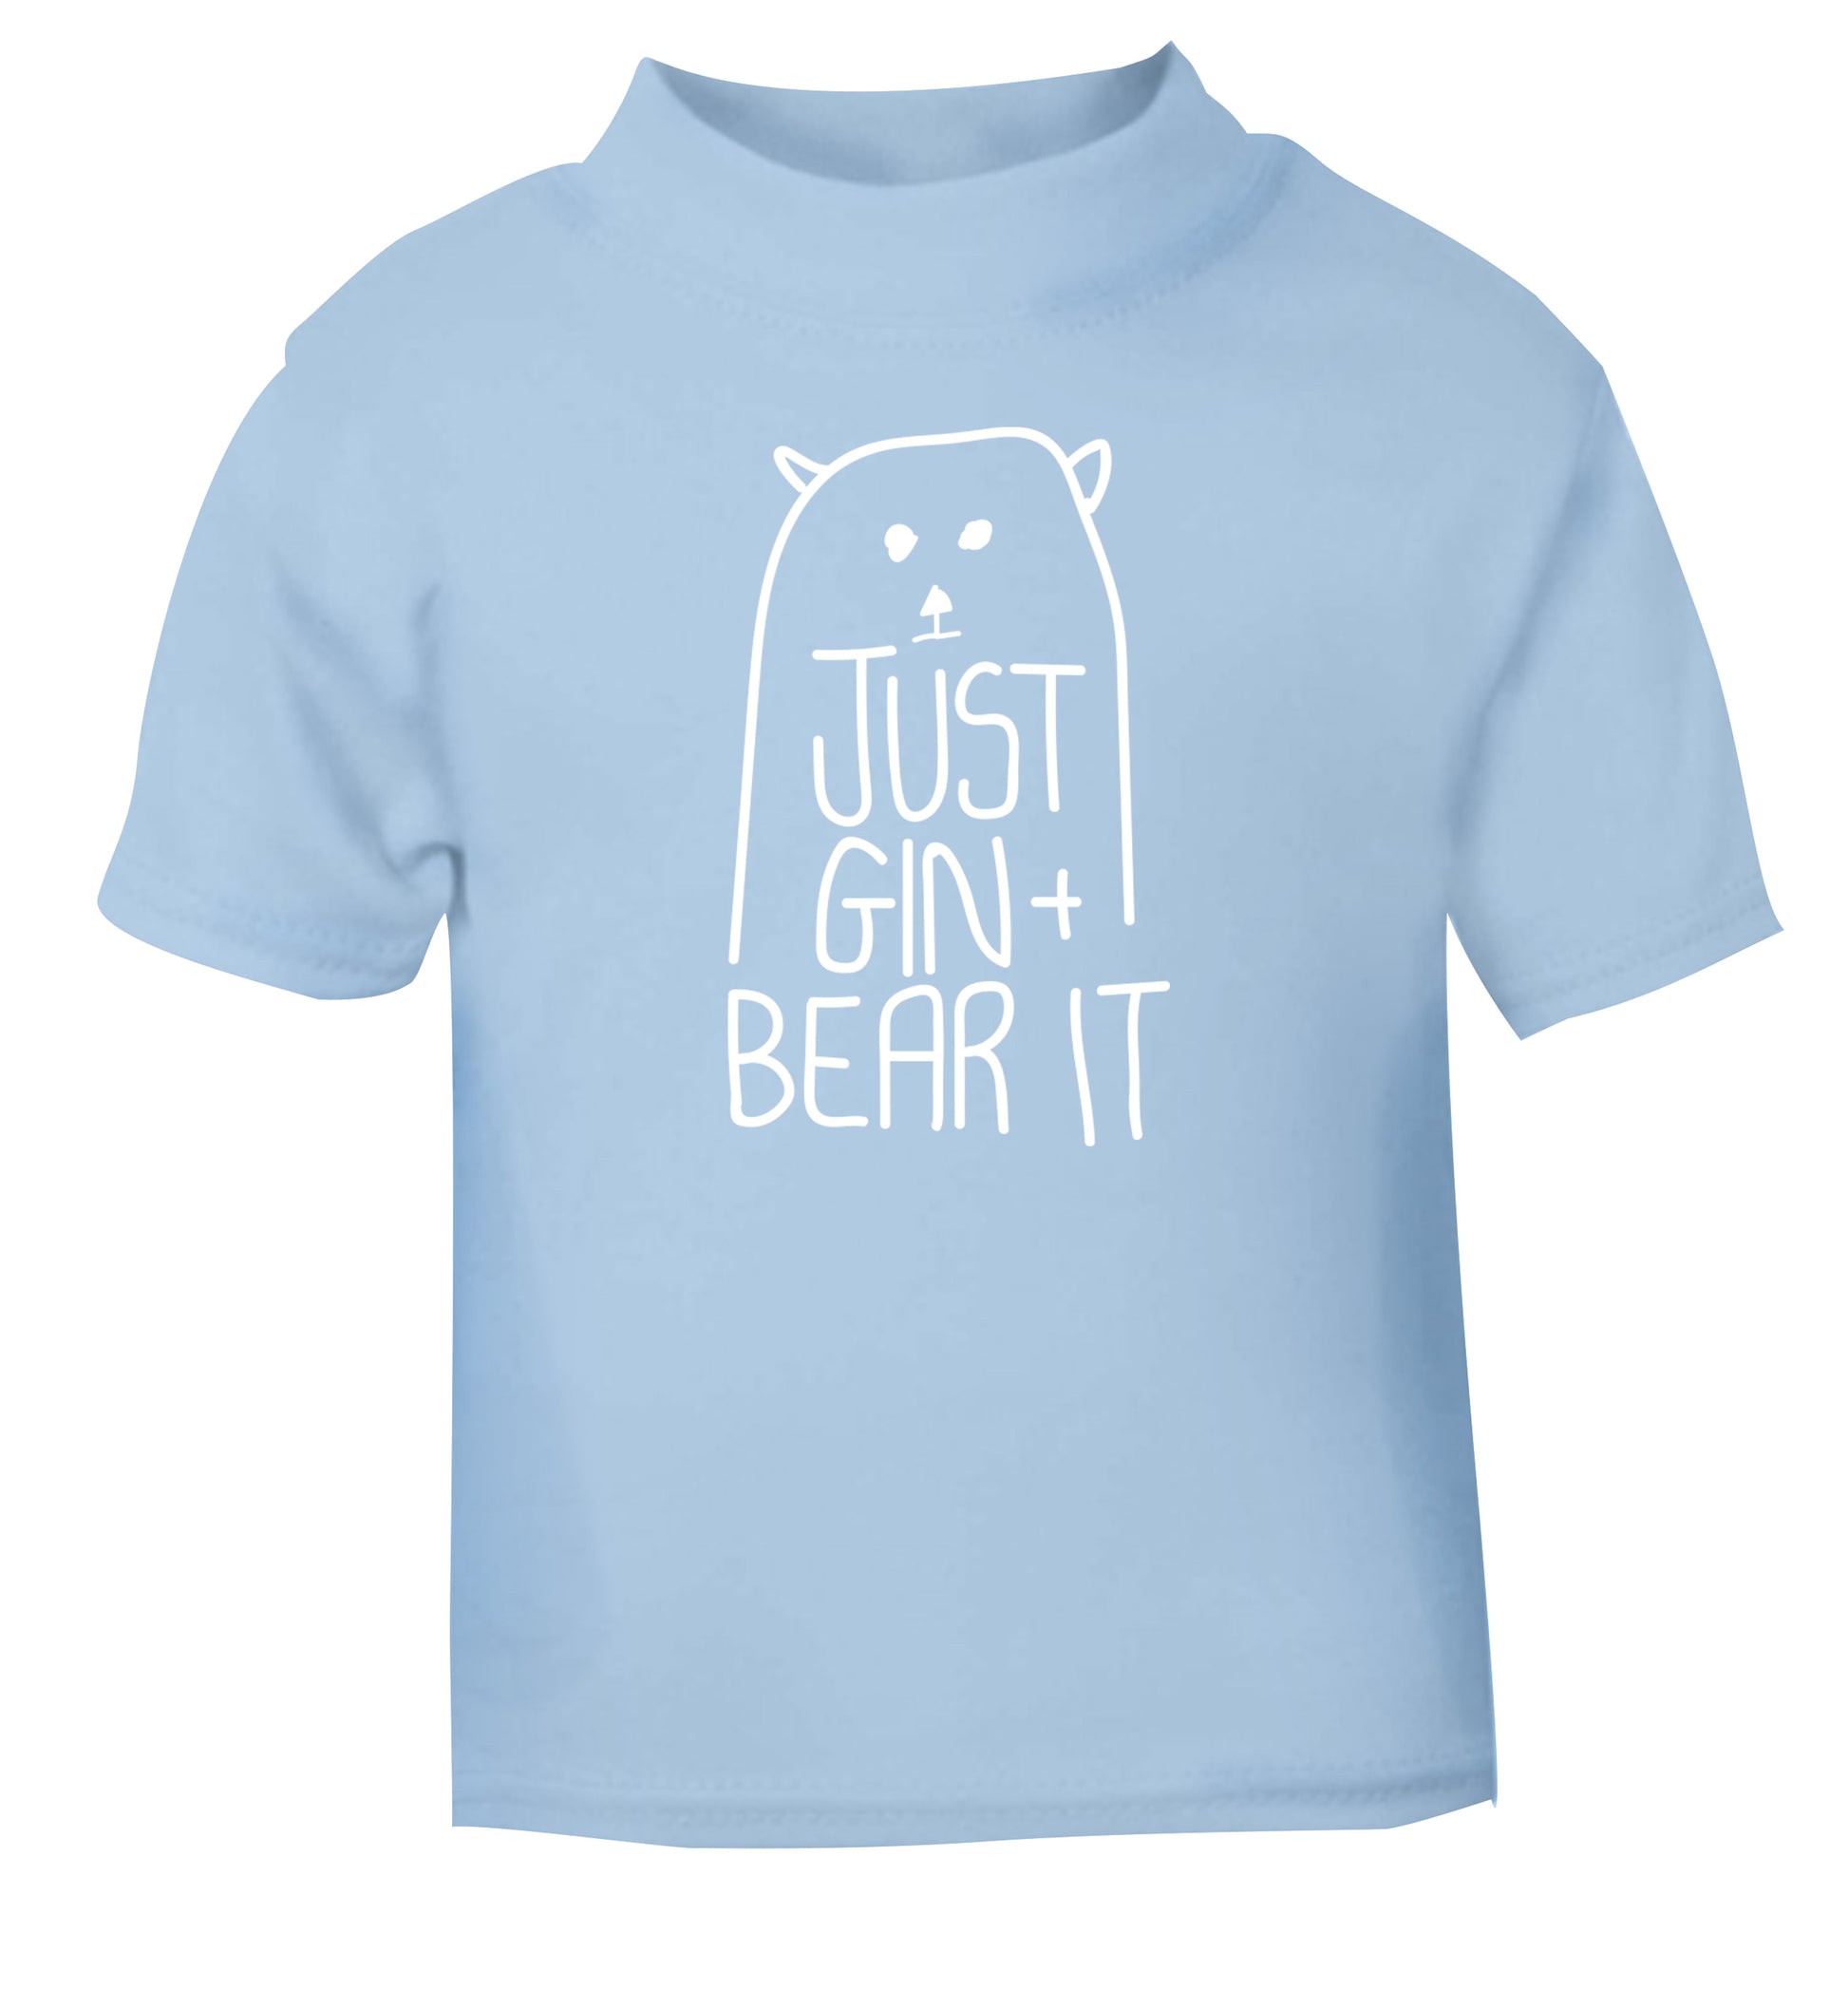 Just gin and bear it light blue Baby Toddler Tshirt 2 Years